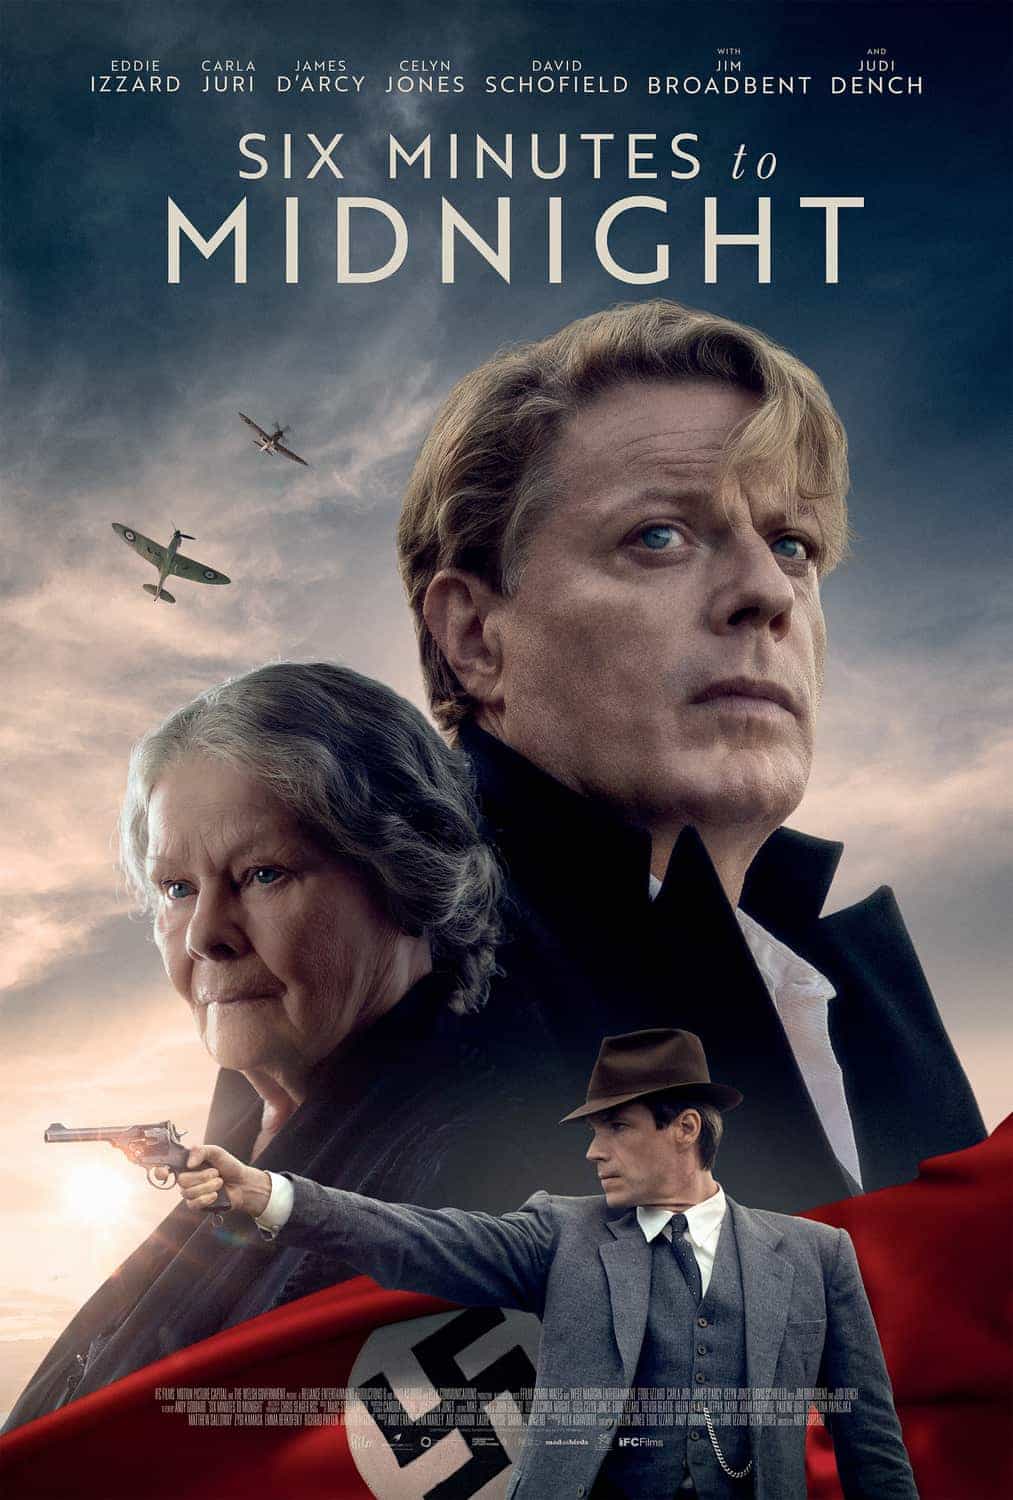 Six Minutes To Midnight has been given a 12A age rating in the UK for moderate violence, threat, bloody images